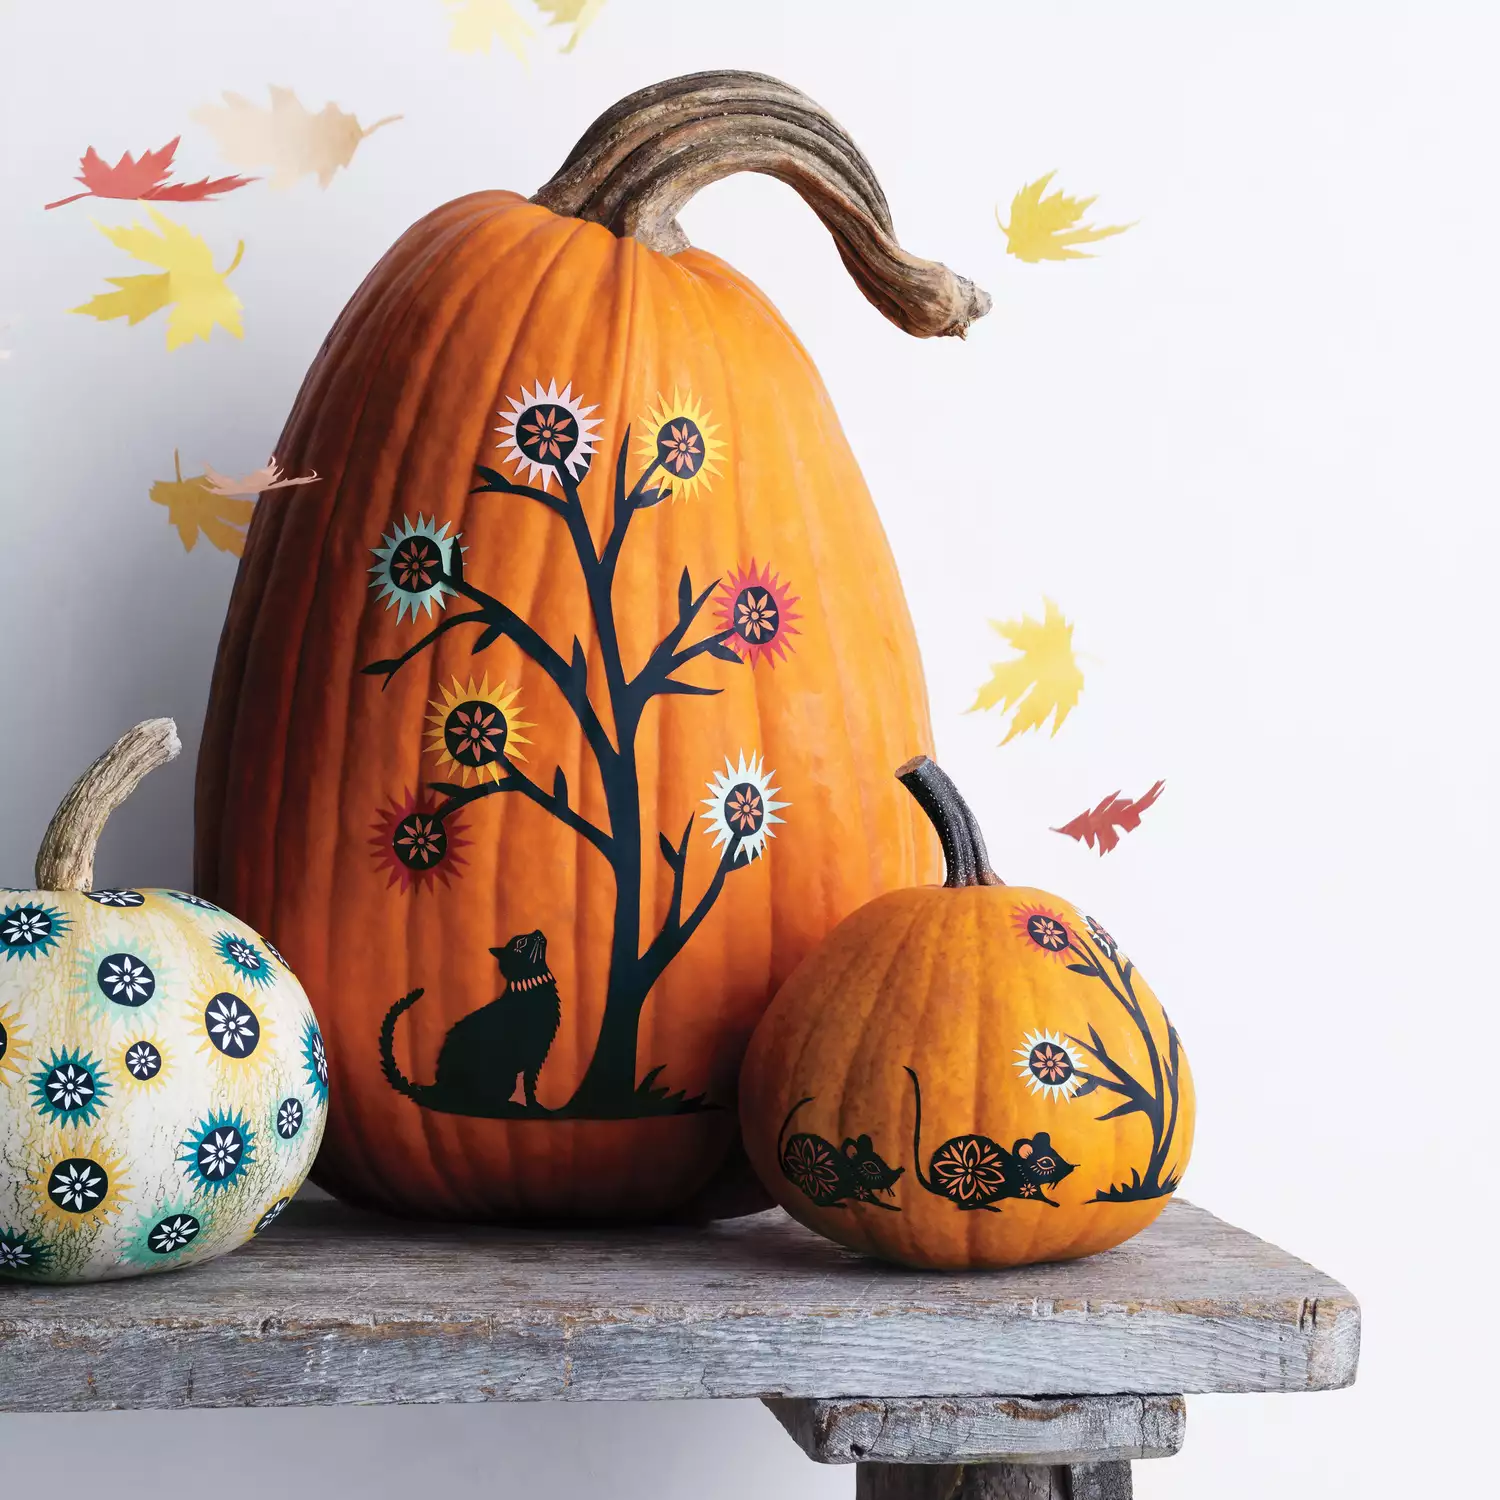 How to Découpage a Halloween Pumpkin Using Our Exclusive Templates